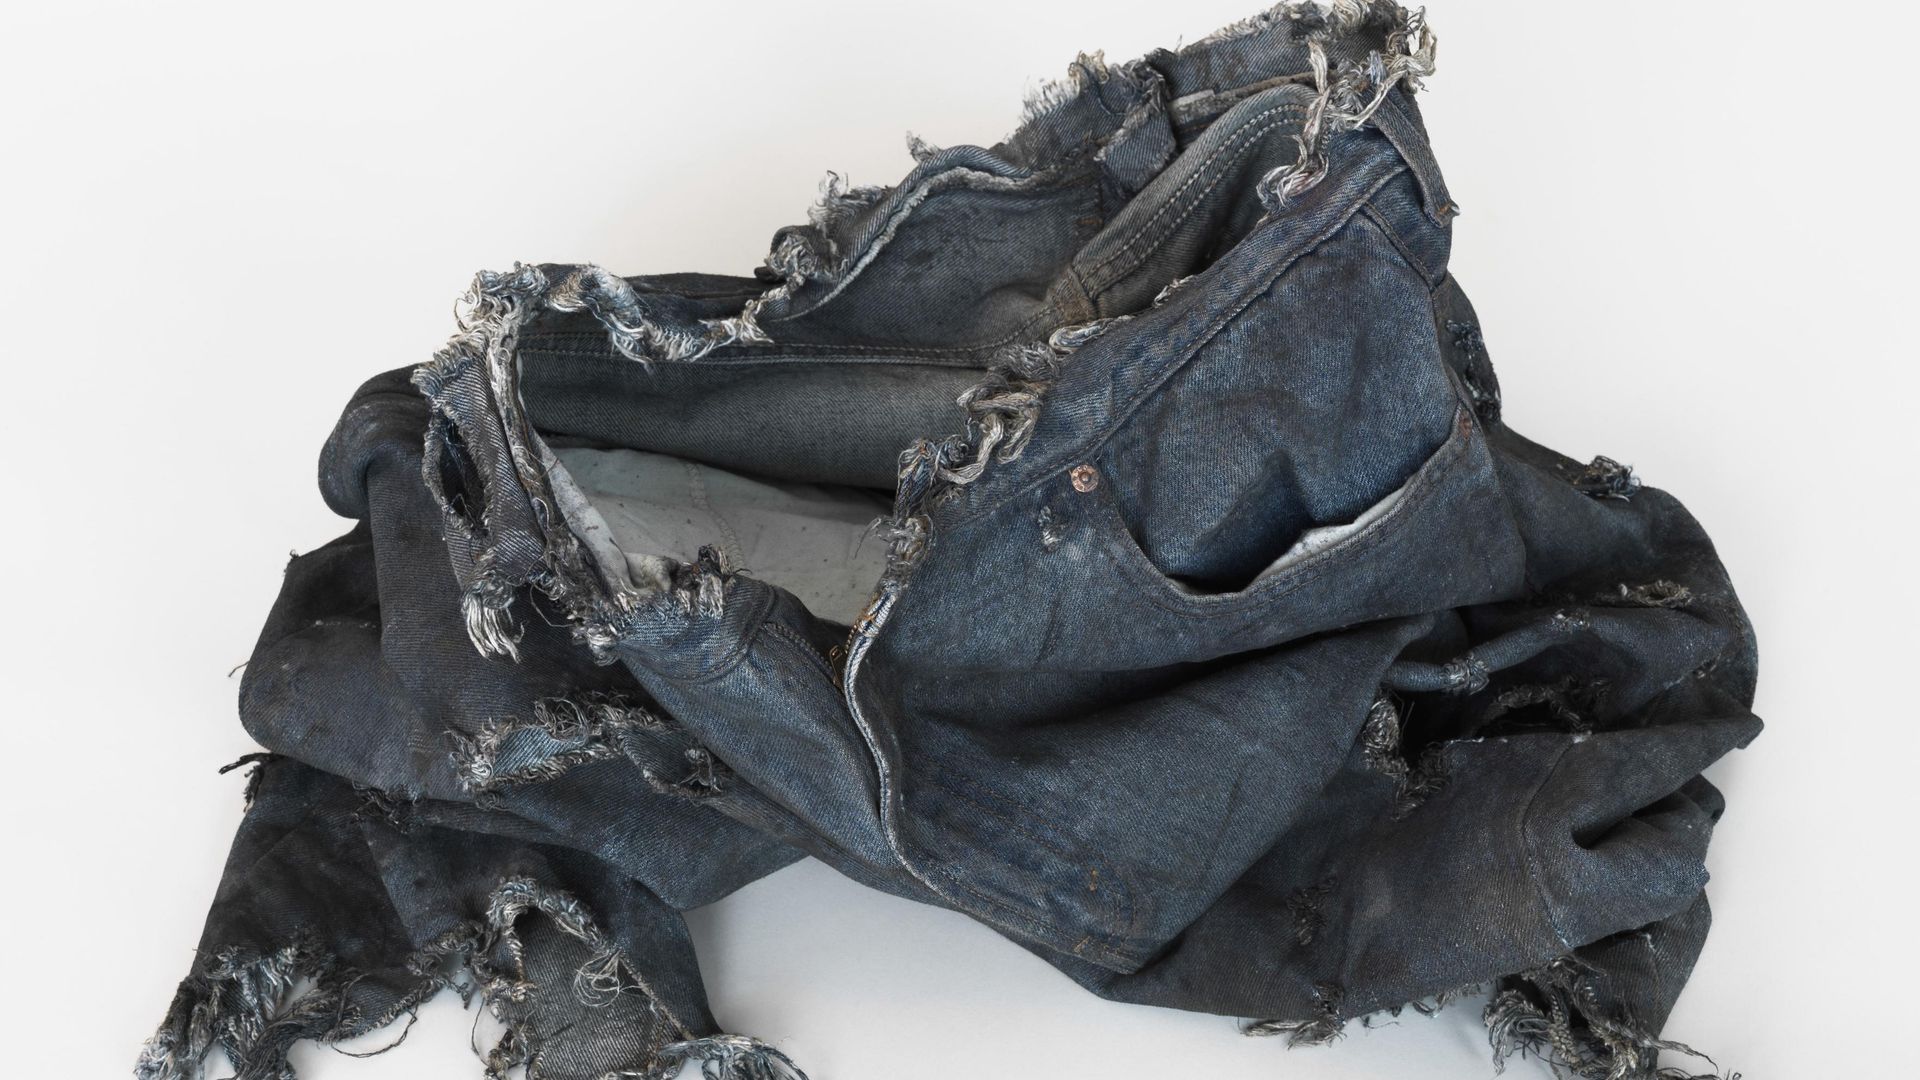 Monika Stricker, THE INCREDIBLE HULK 2008, Bruce Banner (Edward Norton) Ripped Test Jeans, 2013, mixed media, cooperate cinema, dimensions variabel, Courtesy Clages Cologne